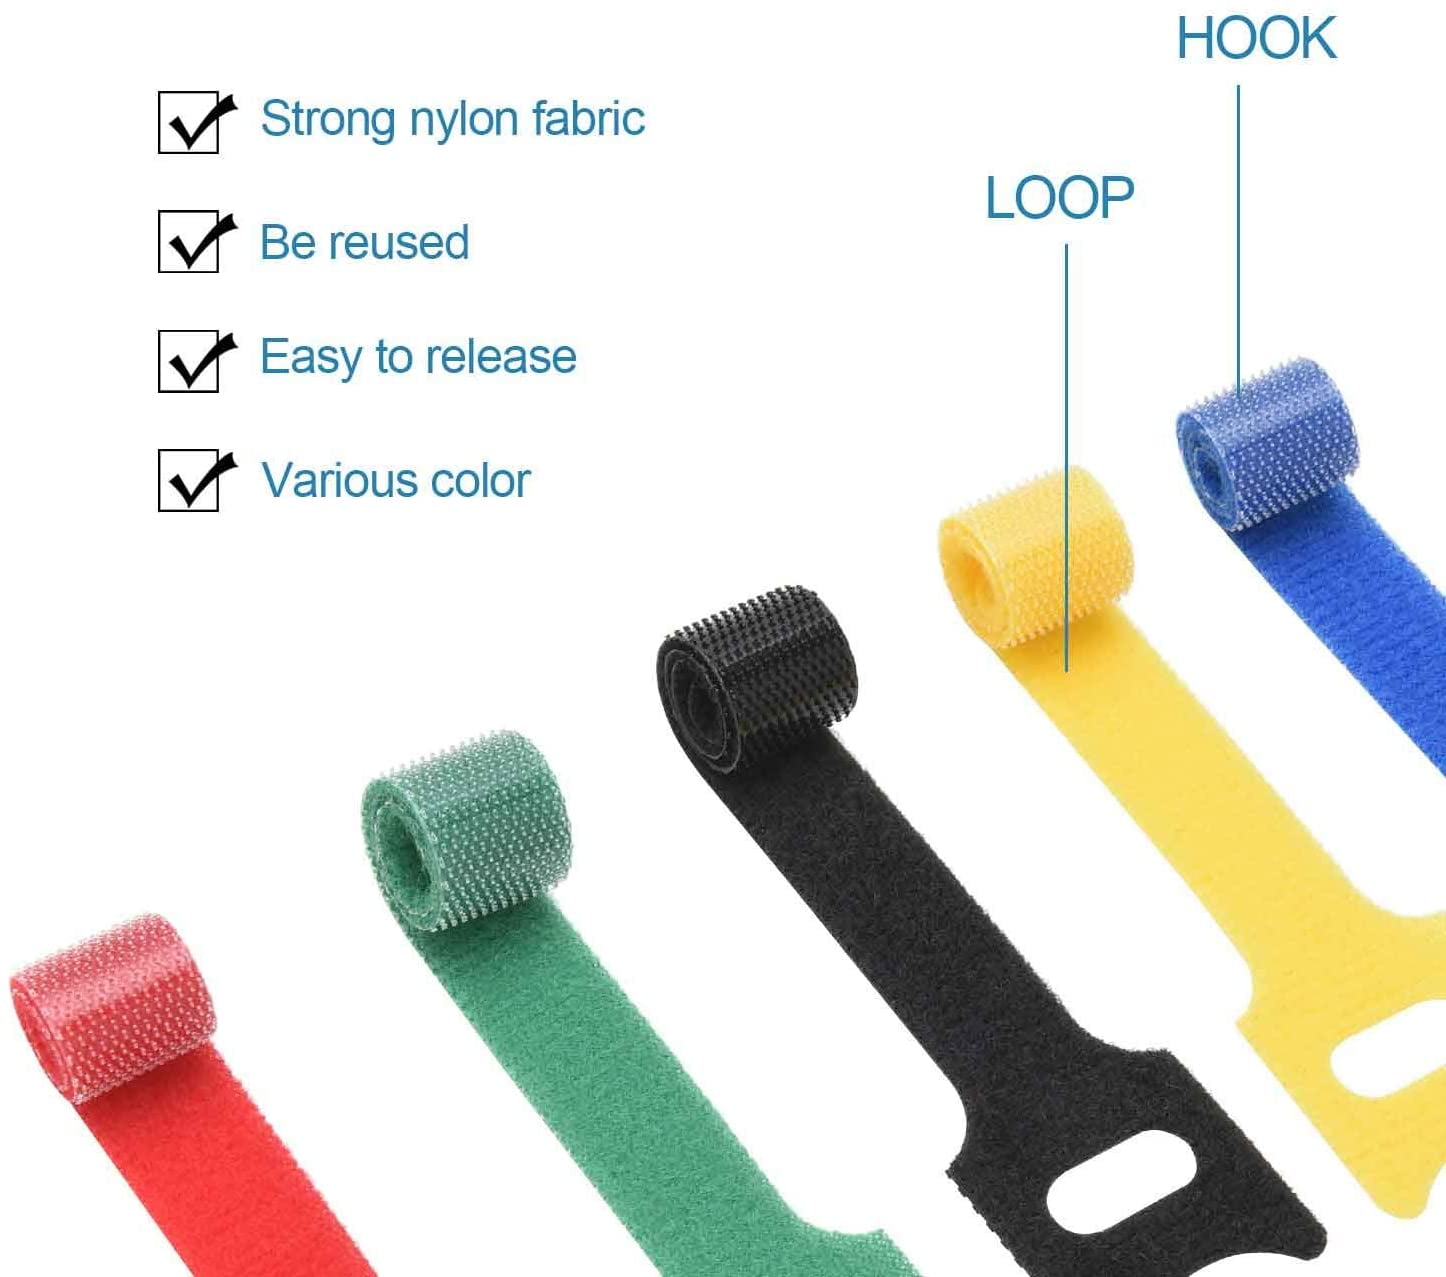 50pcs Reusable Nylon Strap Hook and Loop Cable Cord Ties Tidy Organiser Durable 